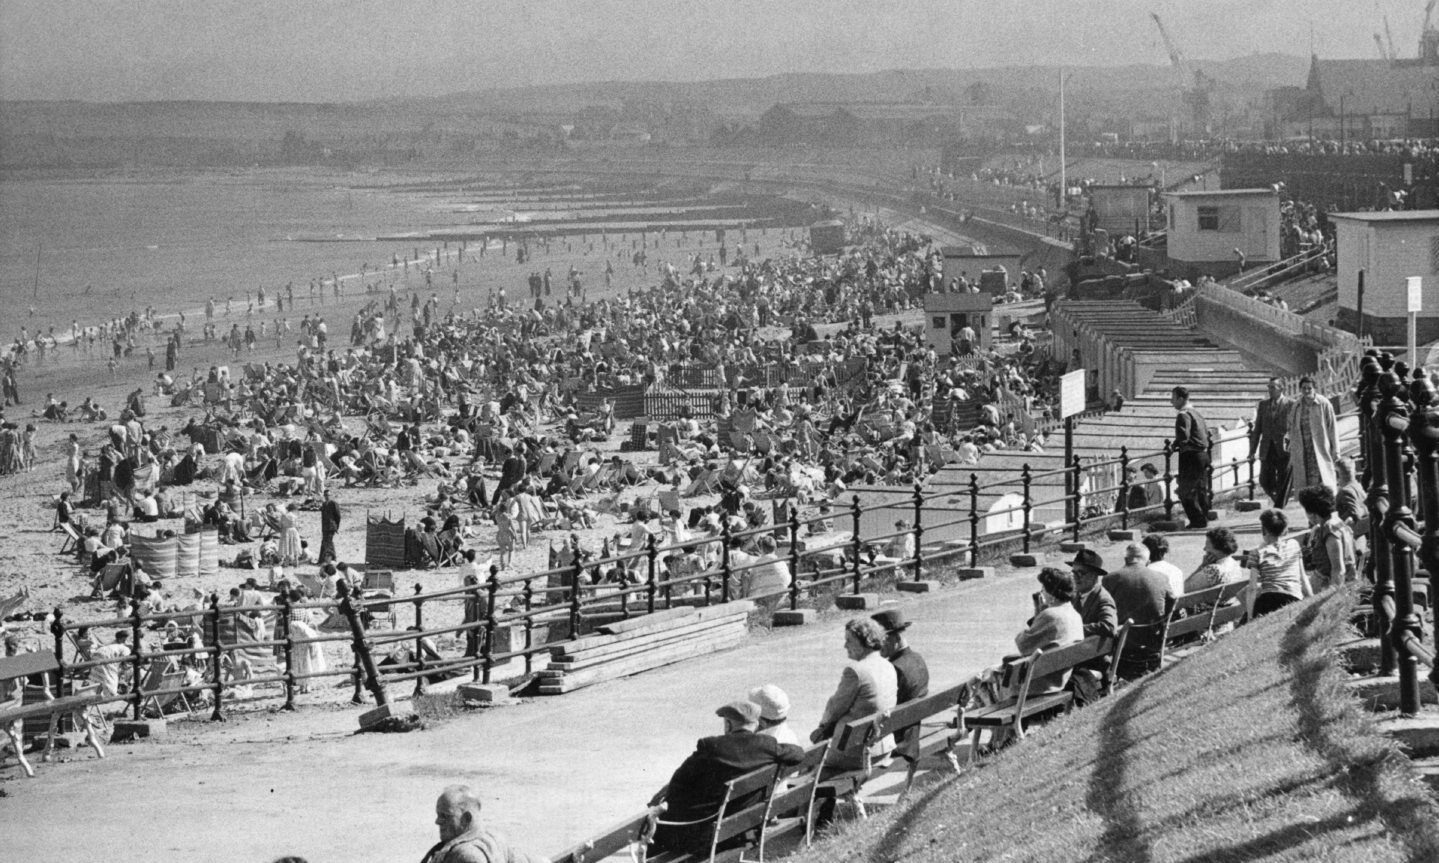 A black and white photo of a view along the sands of Aberdeen Beach in 1958